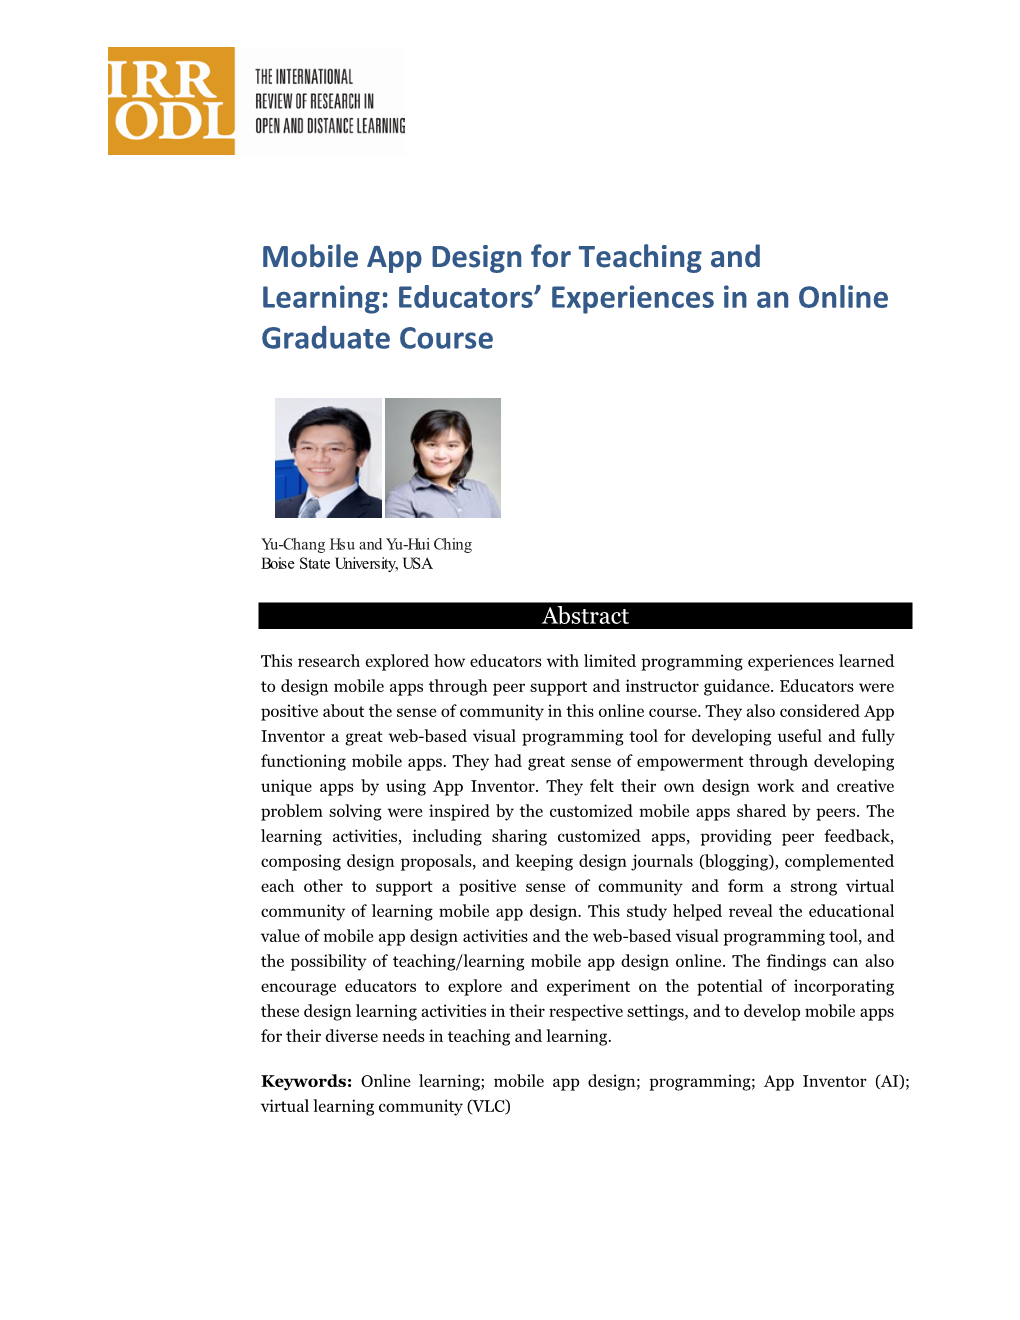 Mobile App Design for Teaching and Learning: Educators’ Experiences in an Online Graduate Course